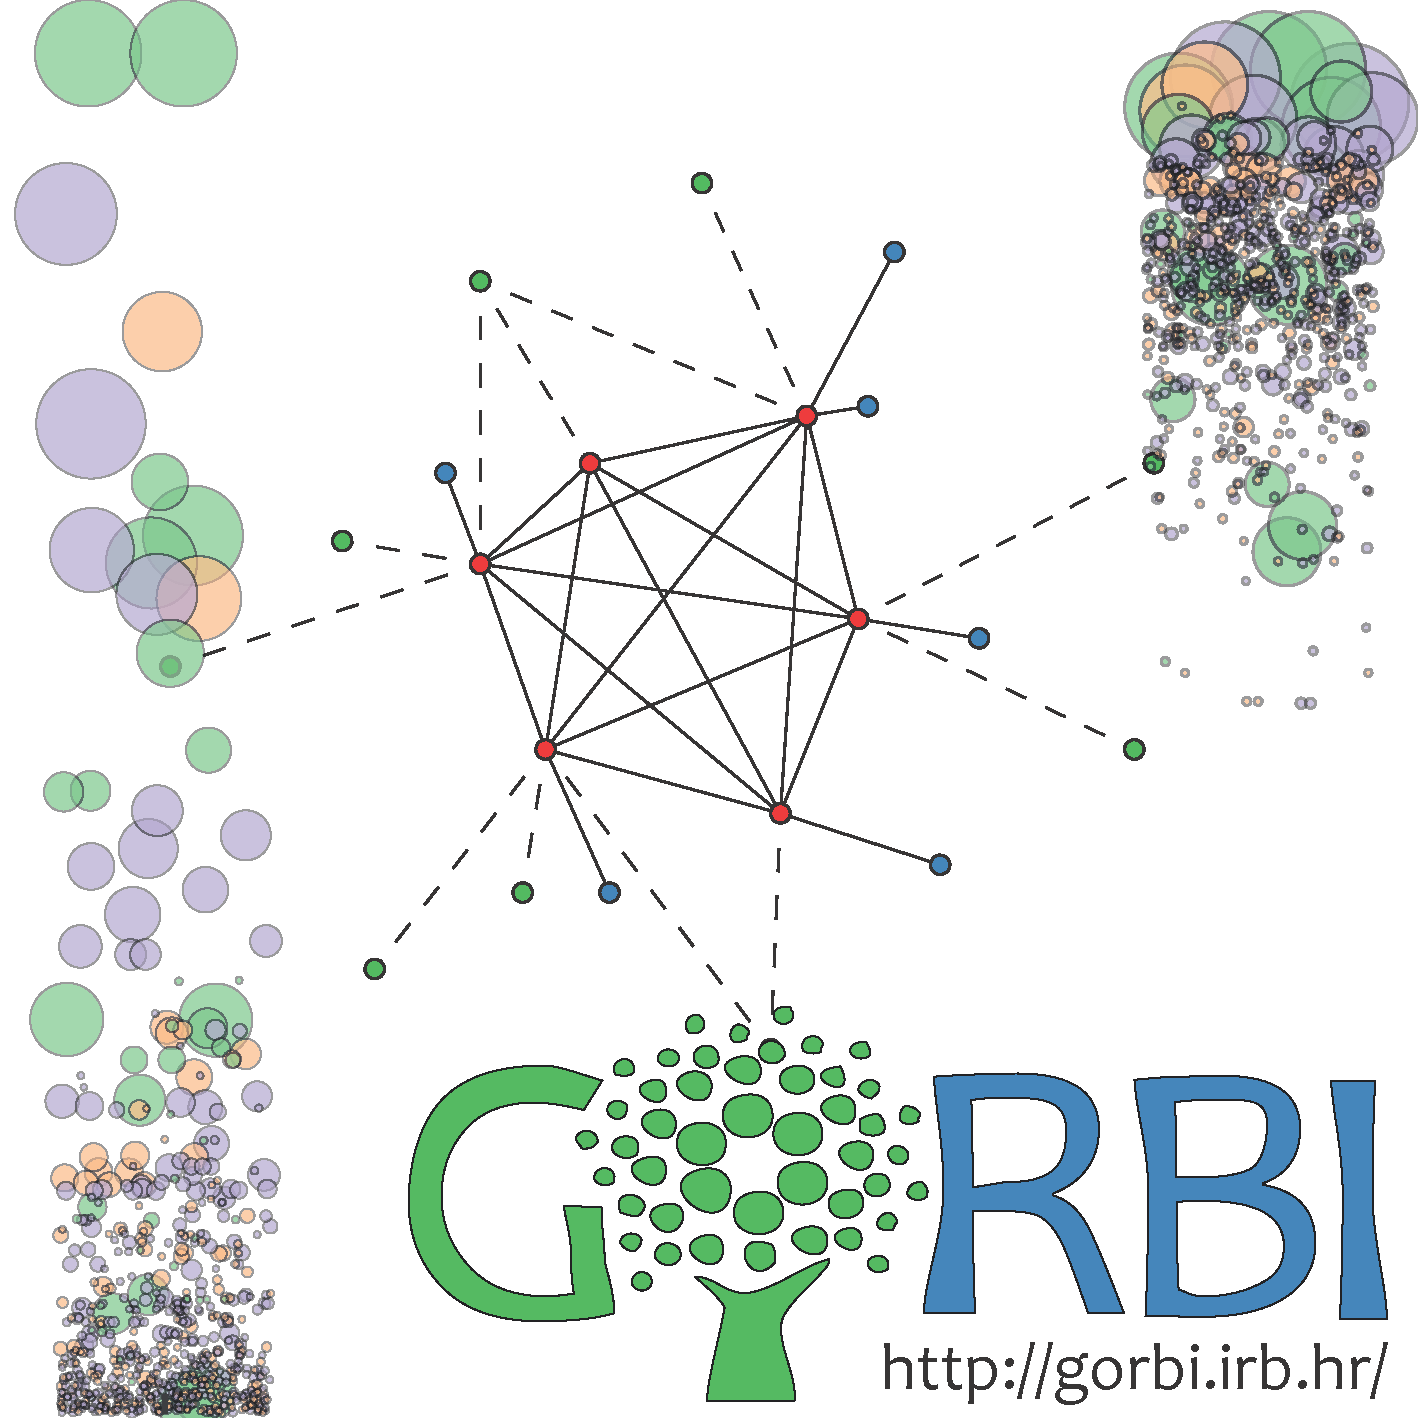 GORBI Scientists Developed a New Method for Gene Function Assignment